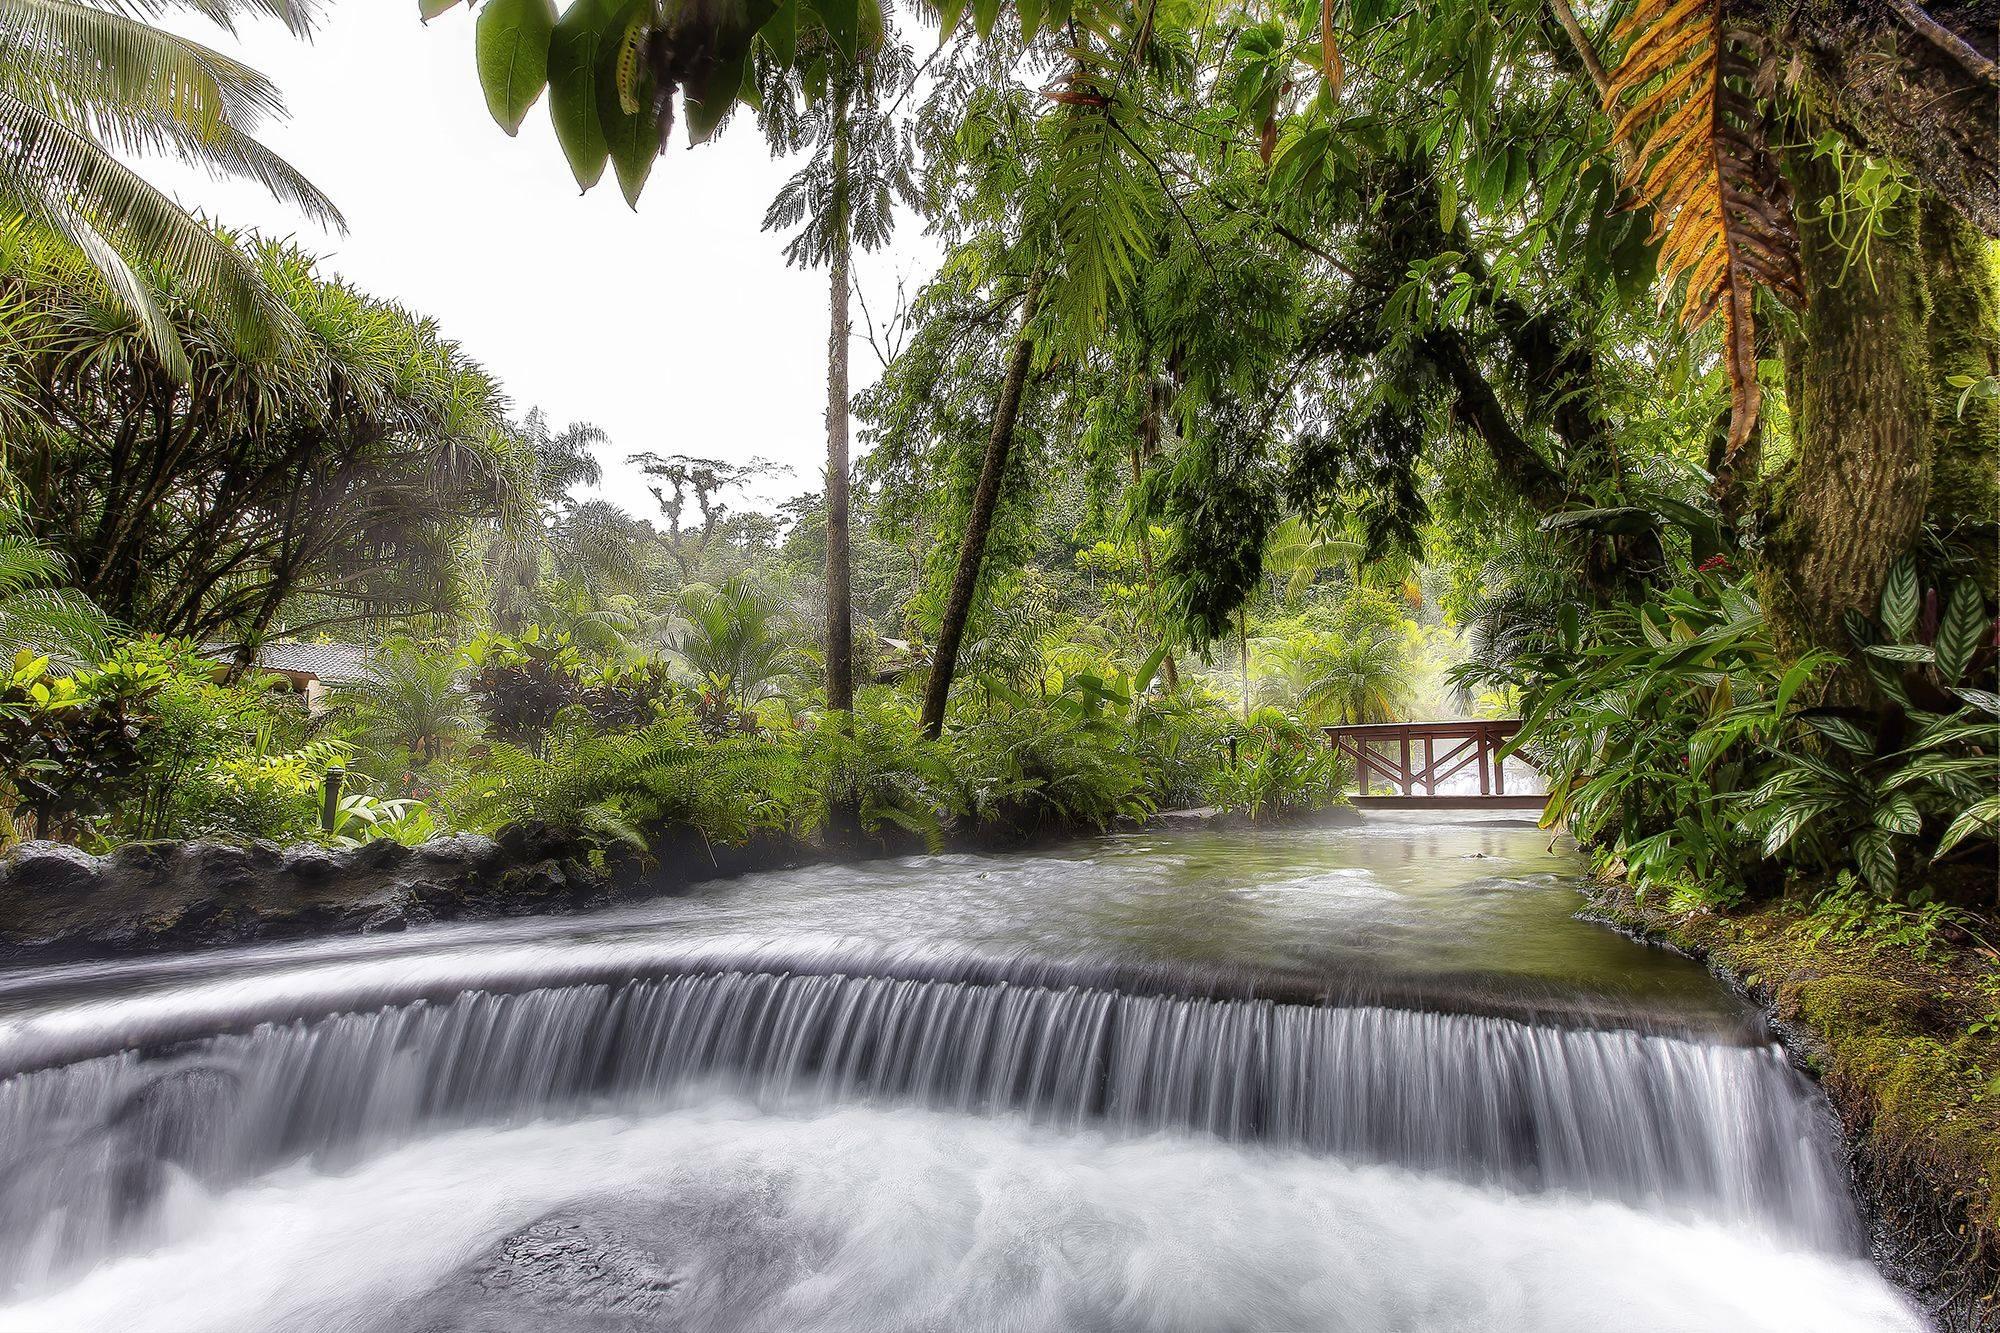 Costa Rica’s Volcanic Hot Springs: A Natural Spa Experience